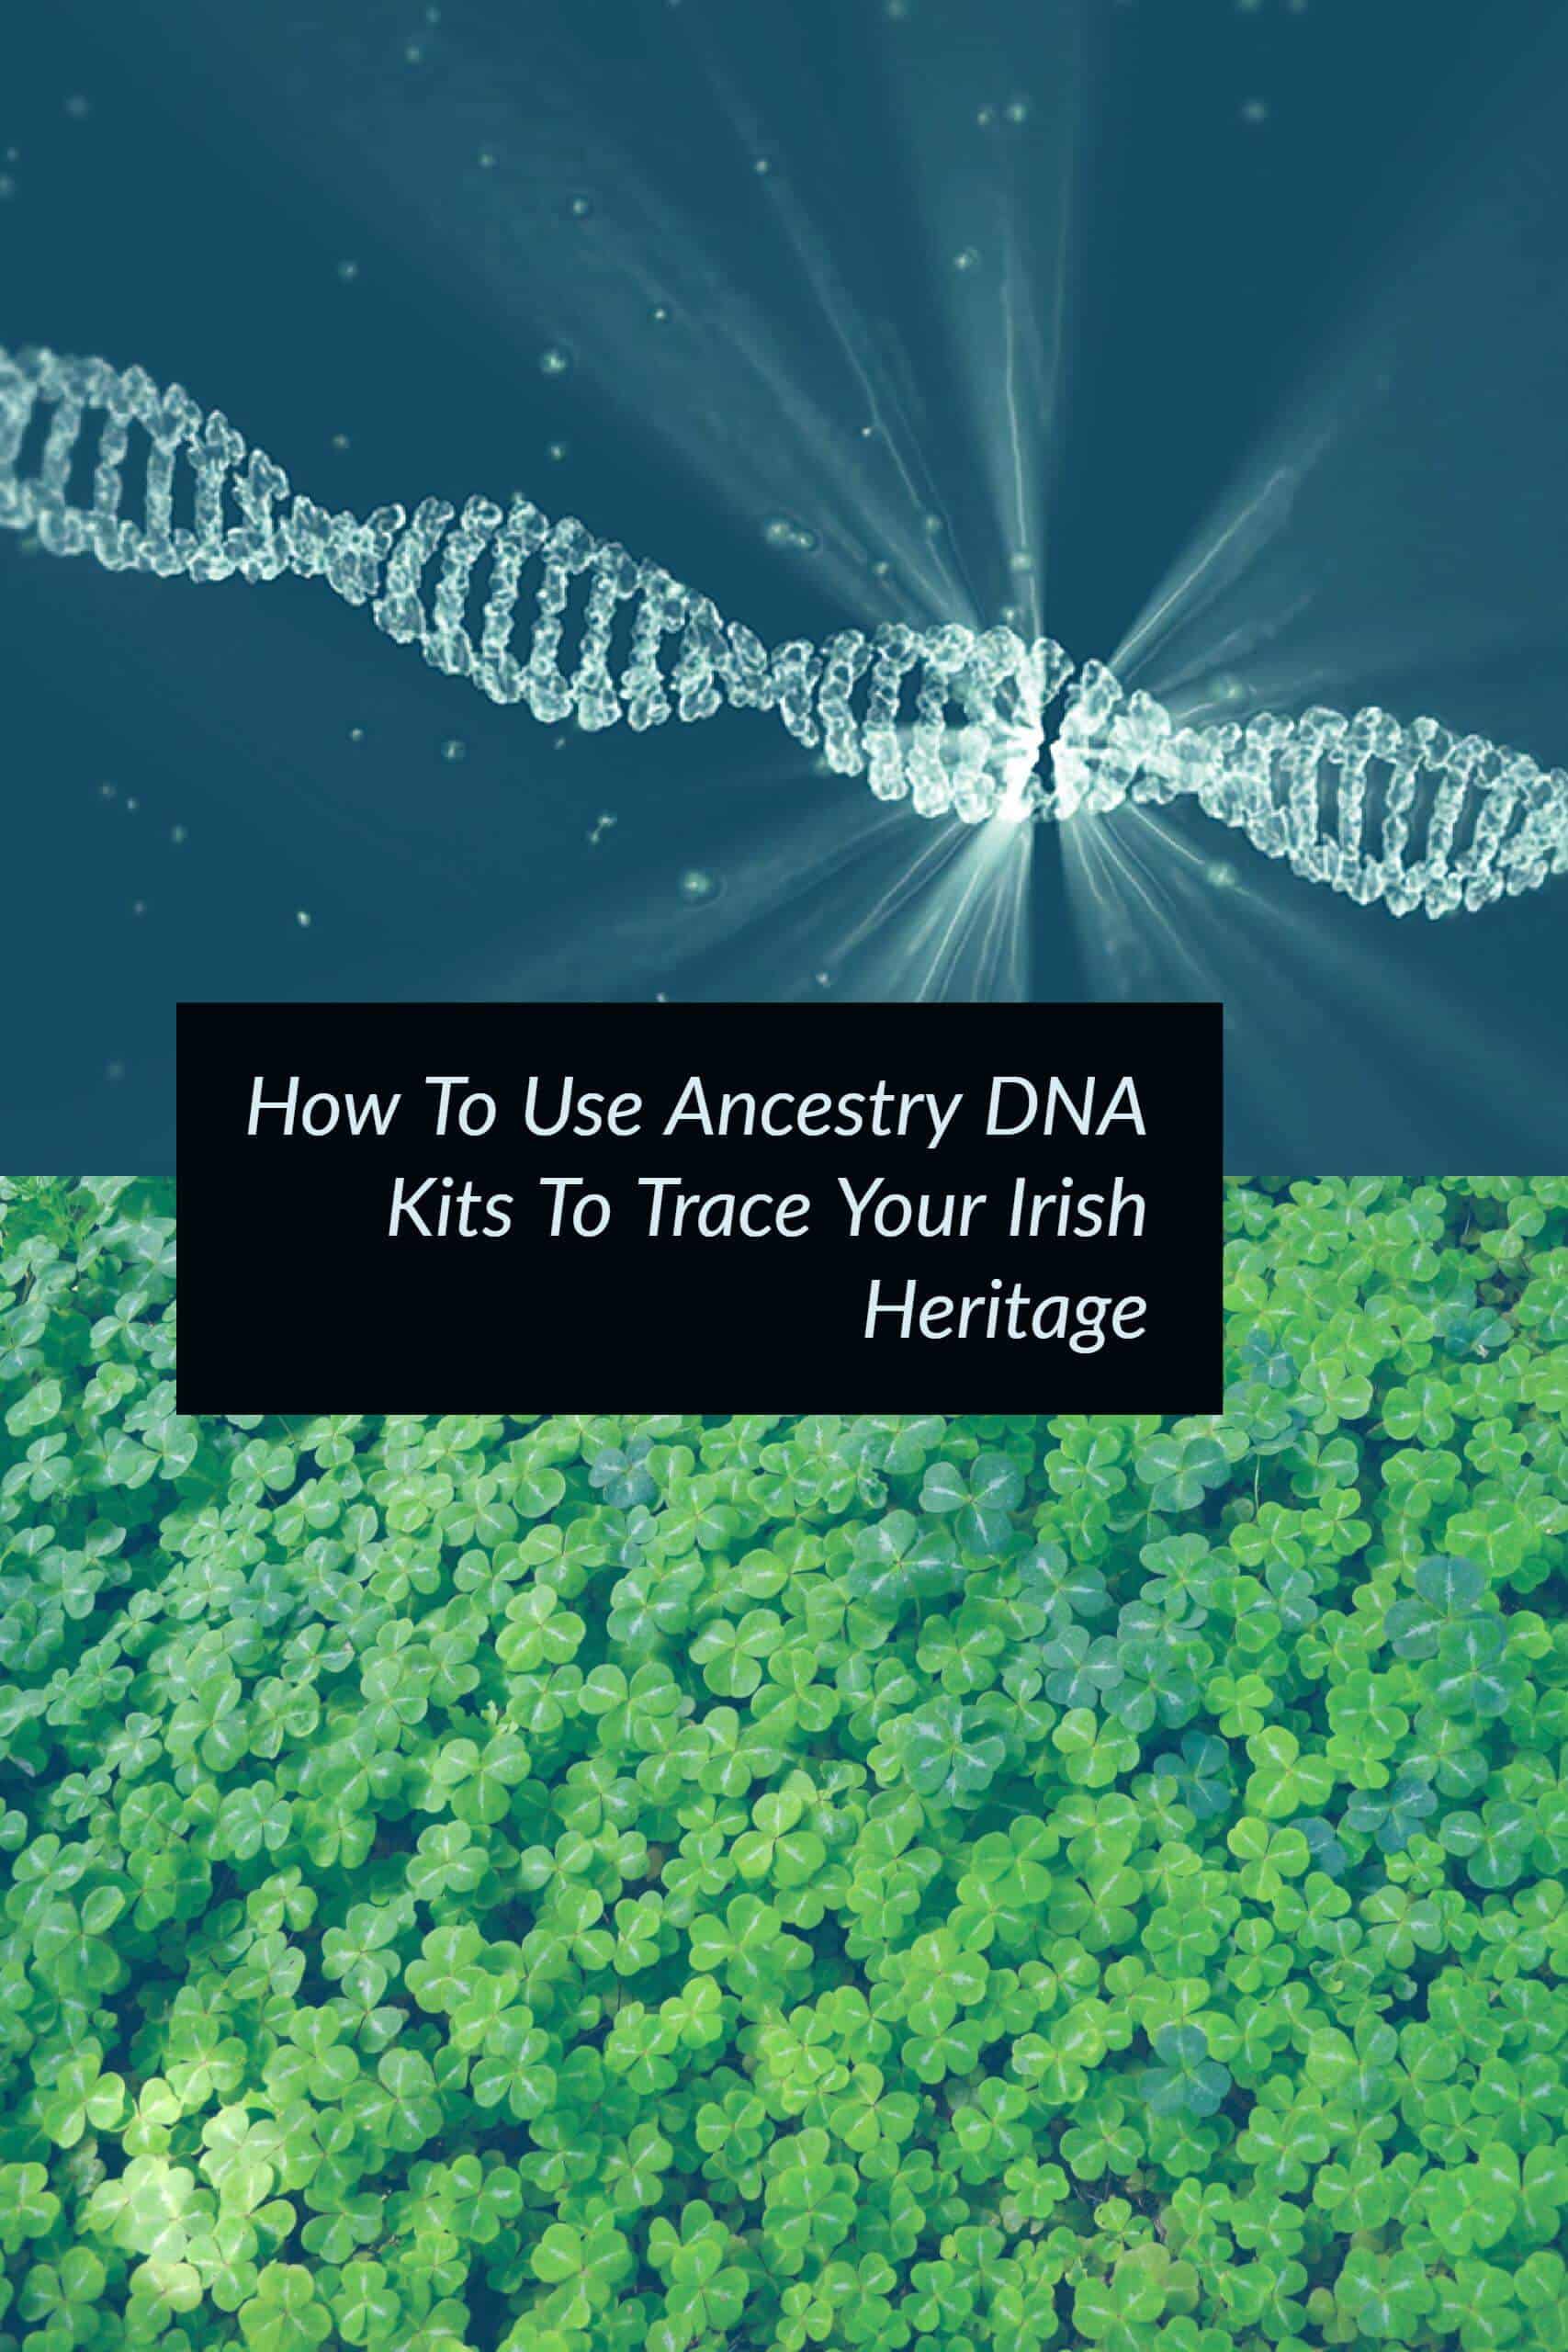 How To Use Ancestry DNA Kits To Trace Your Irish Heritage